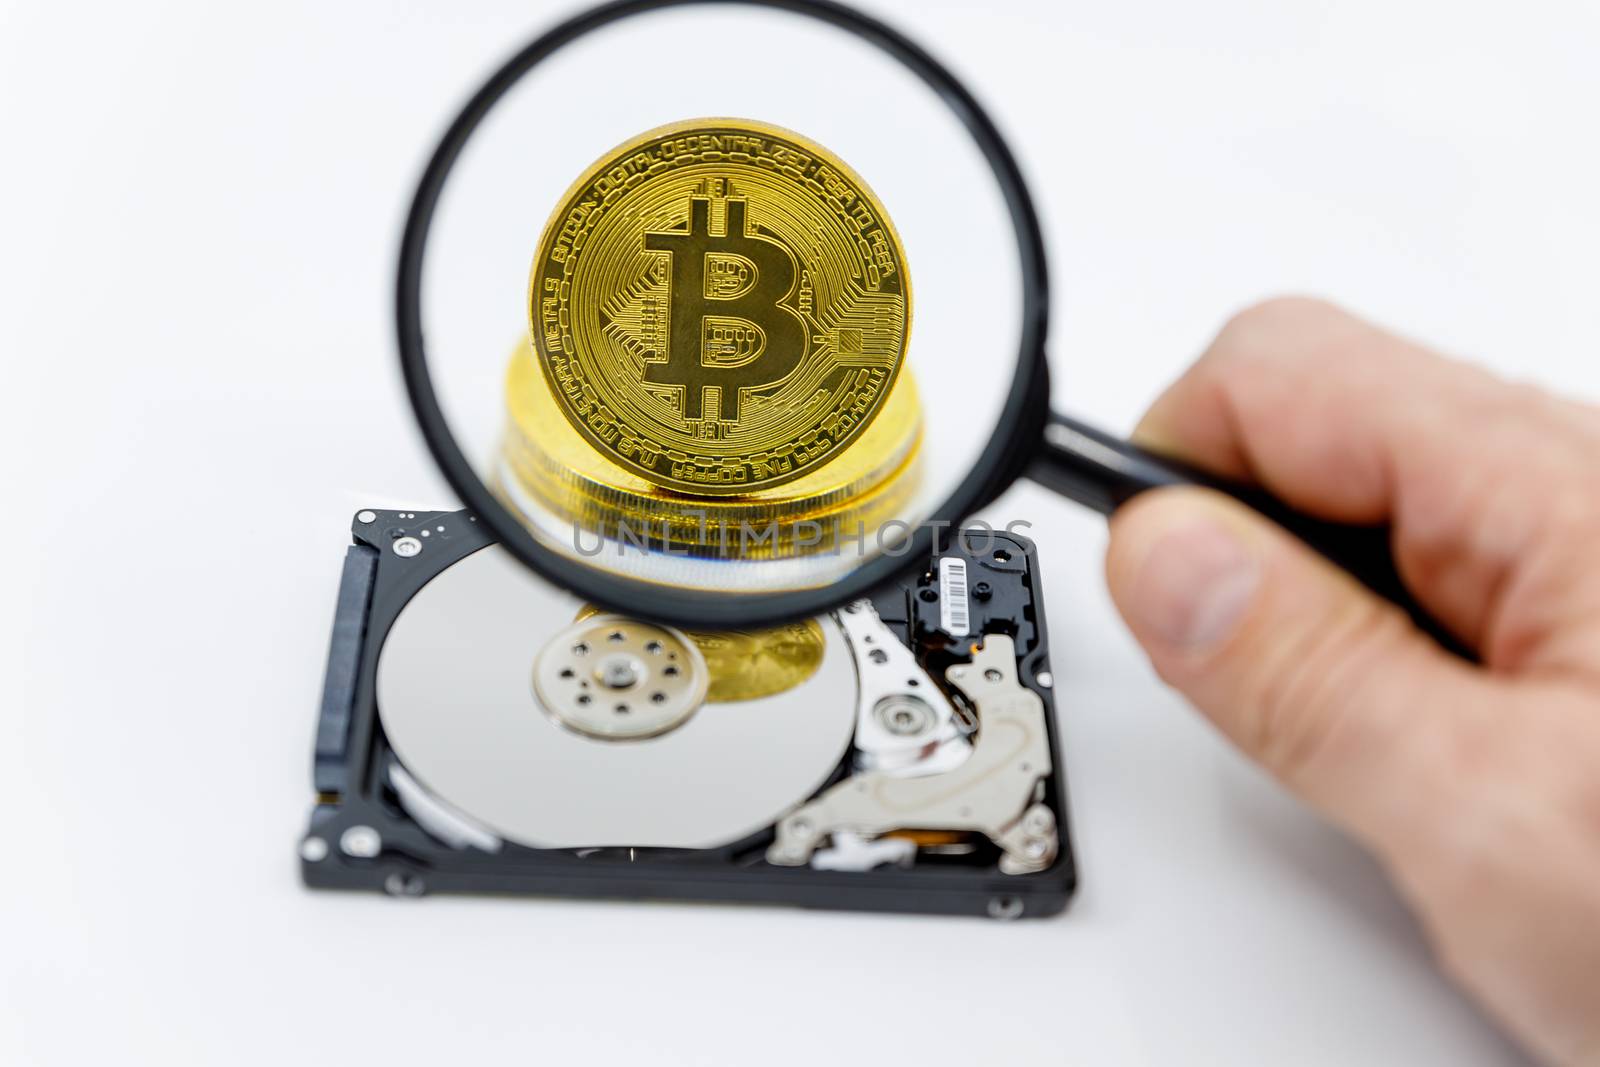 Magnifying glass over a gold bitcoin token on top of an open hard drive.Worldwide virtual internet cryptocurrency and digital payment system.Digital coin money crypto currency